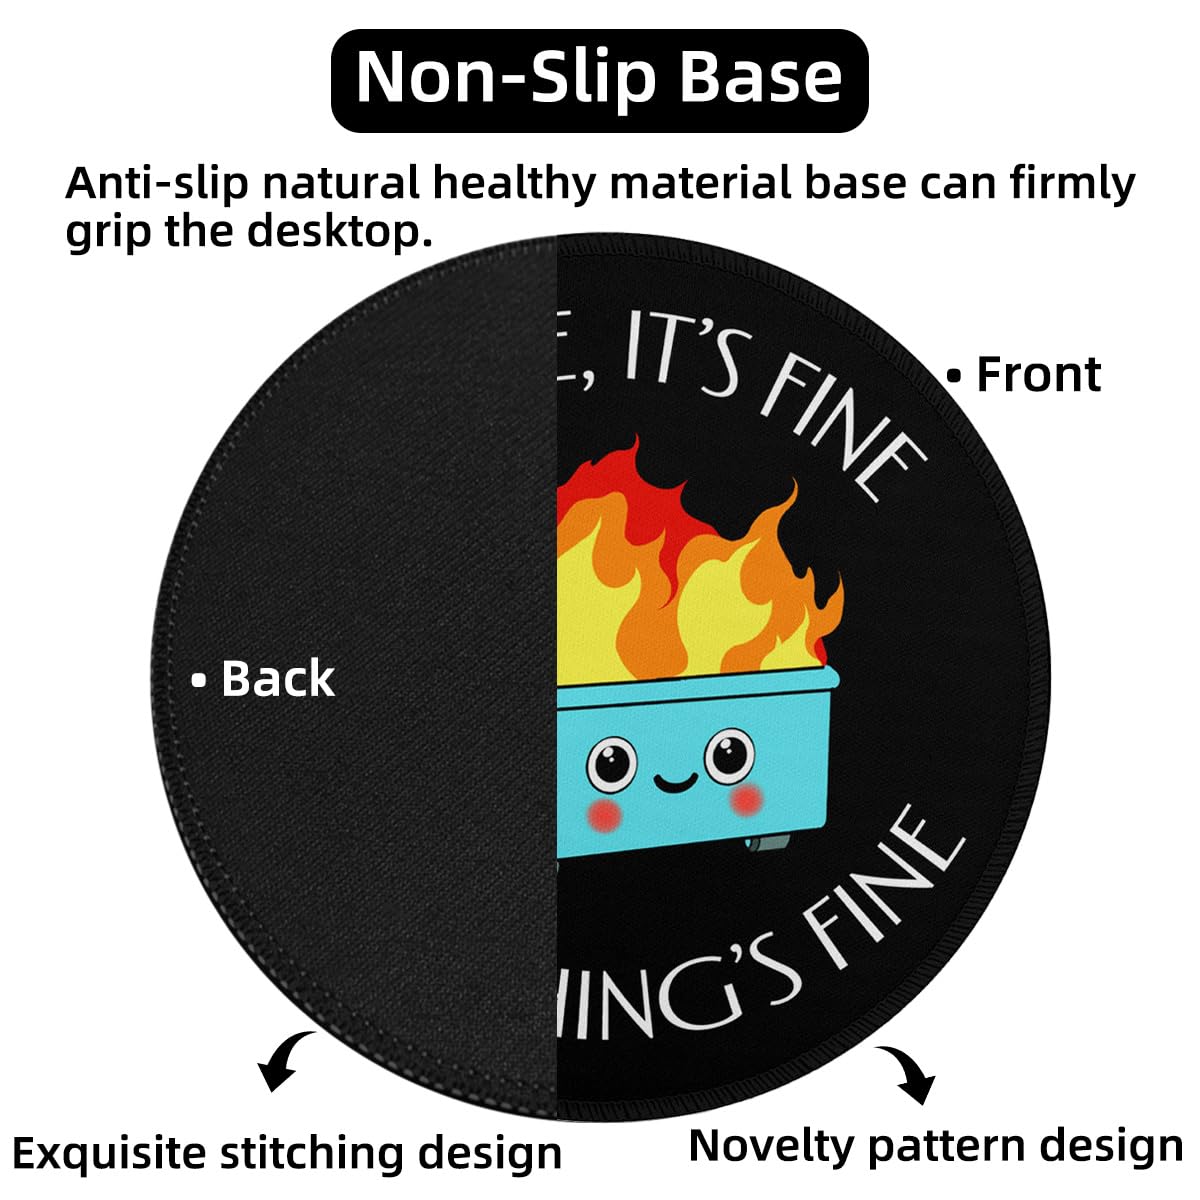 Dumpster on Fire Small Mouse Pad, Cute Funny Round Mousepad with Non-Slip Rubber Base, This is Fine Mouse Pads for Desk Accessories Laptop Gaming Office Supplies Decor(8.6 x 8.6 Inch) - amzGamess